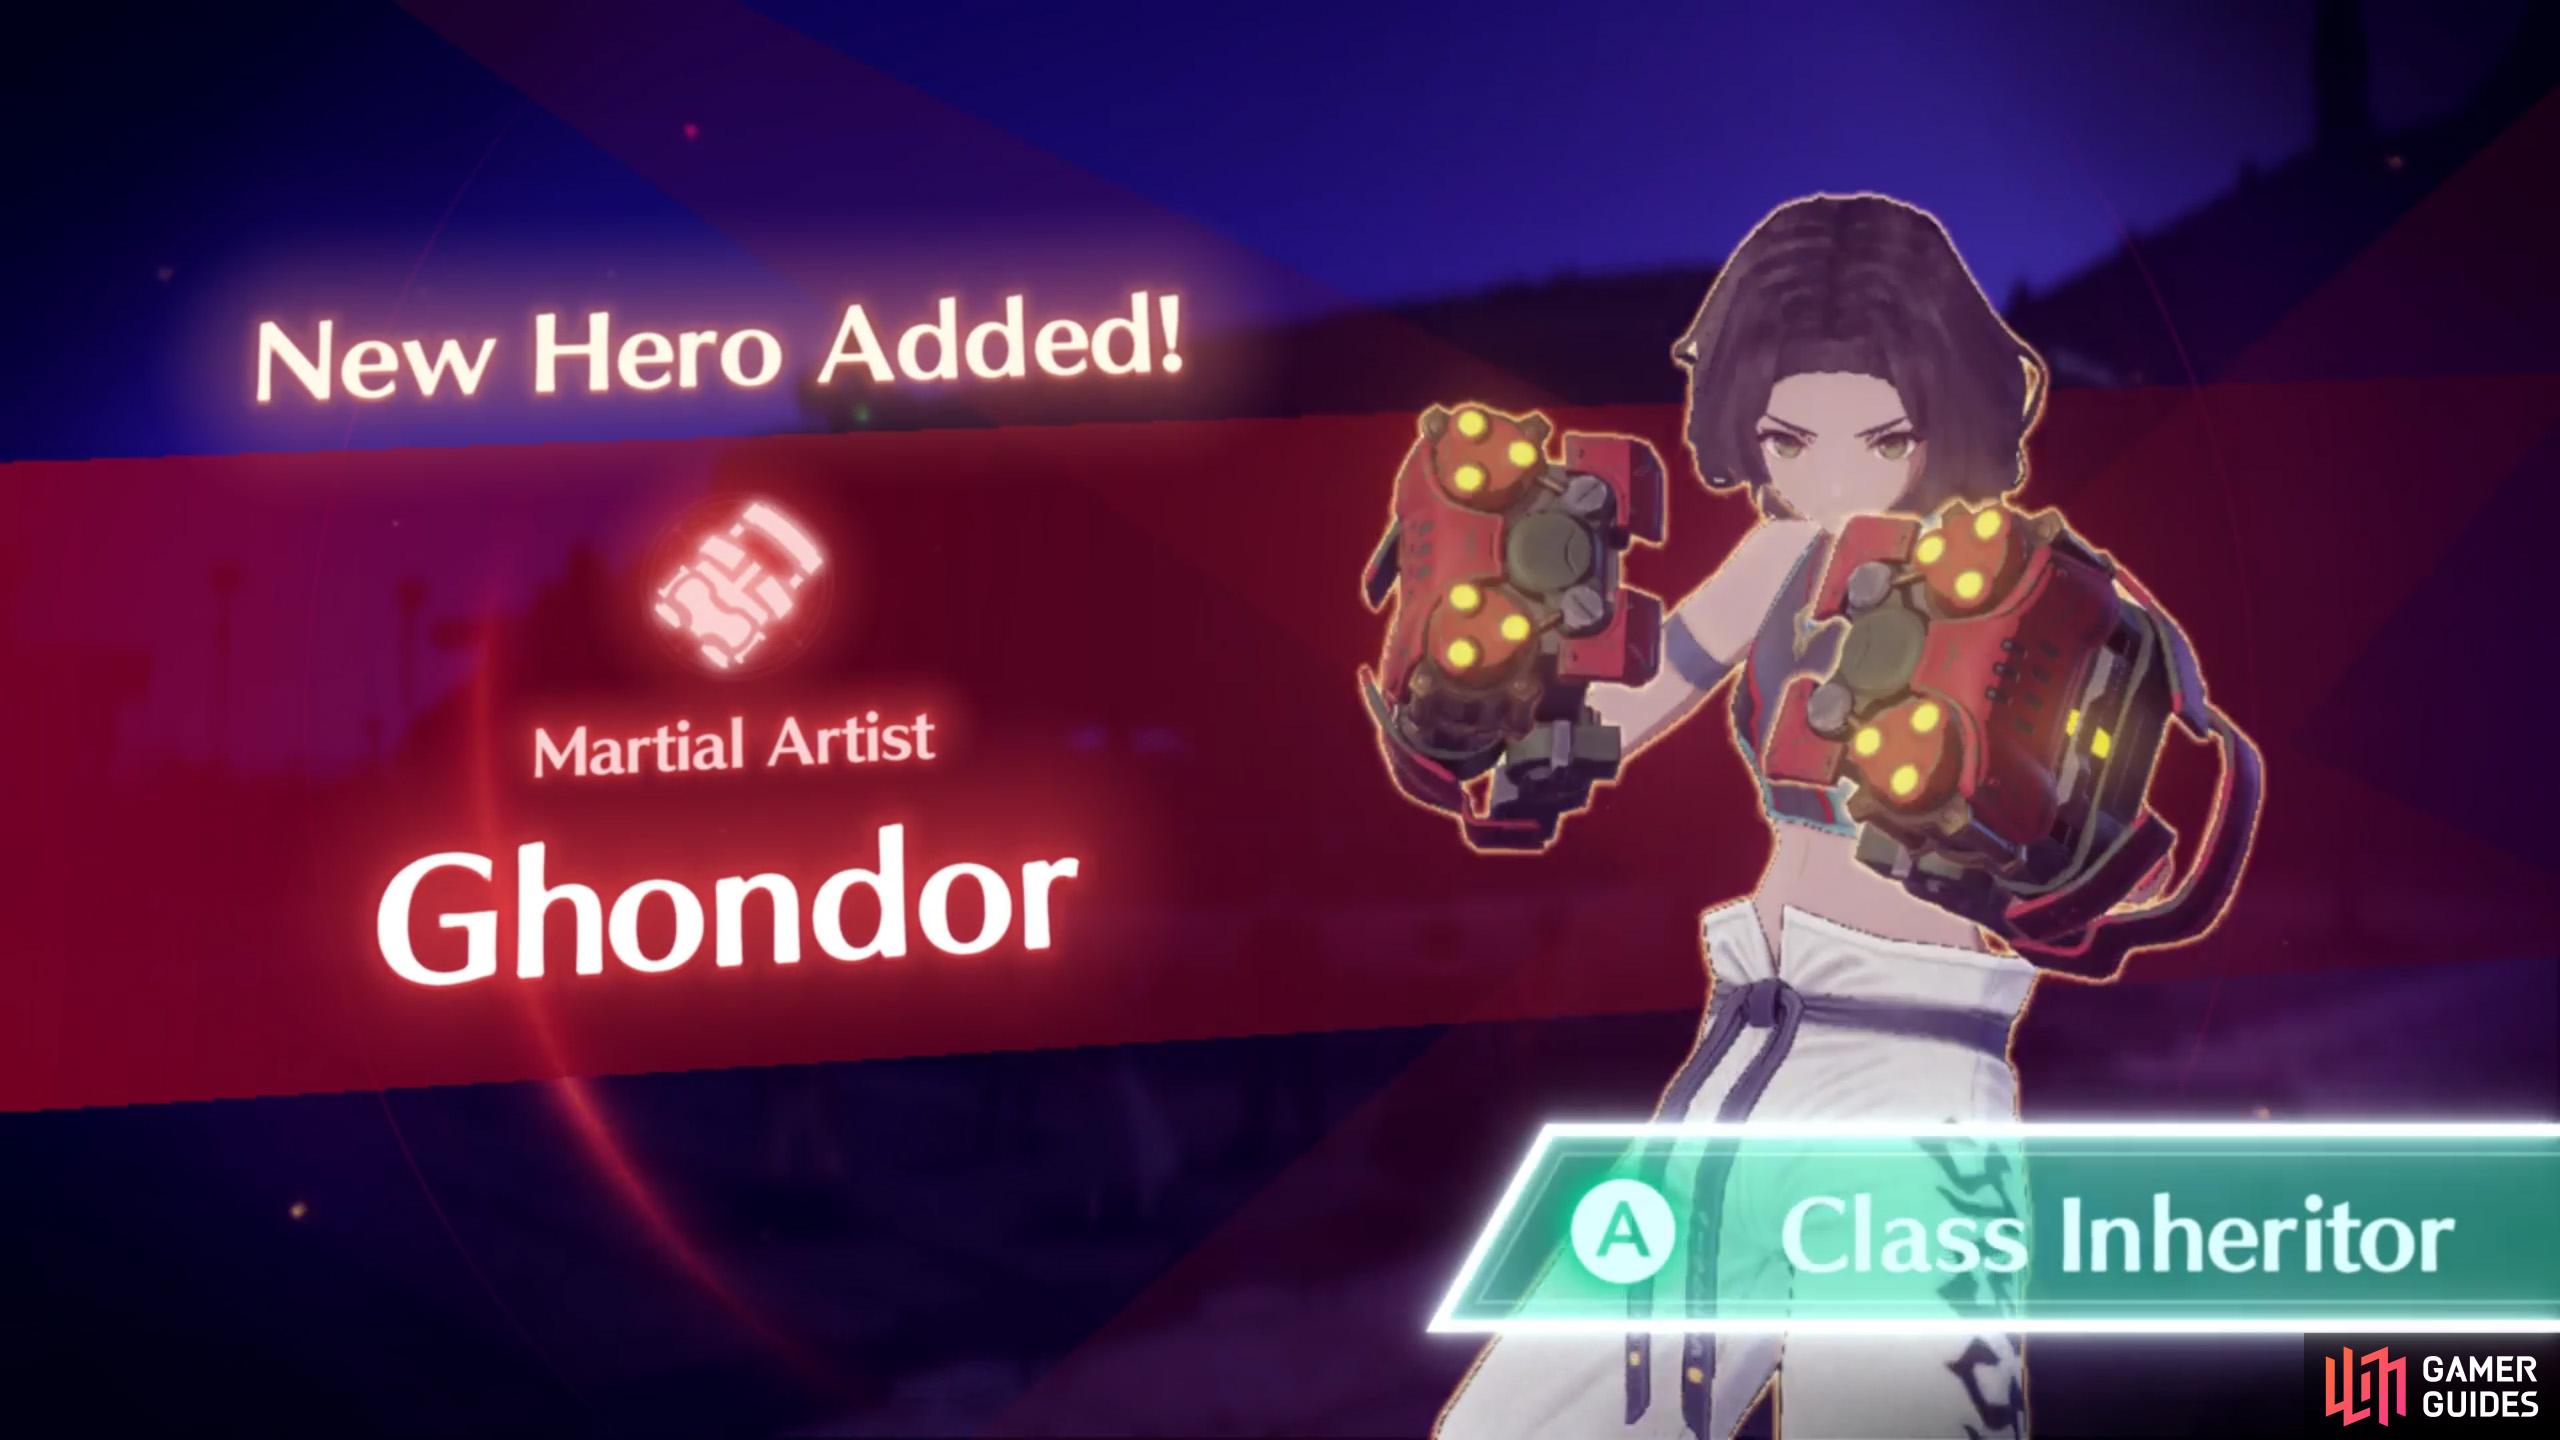 Mio will rejoin you and Ghondor will also join your ranks.